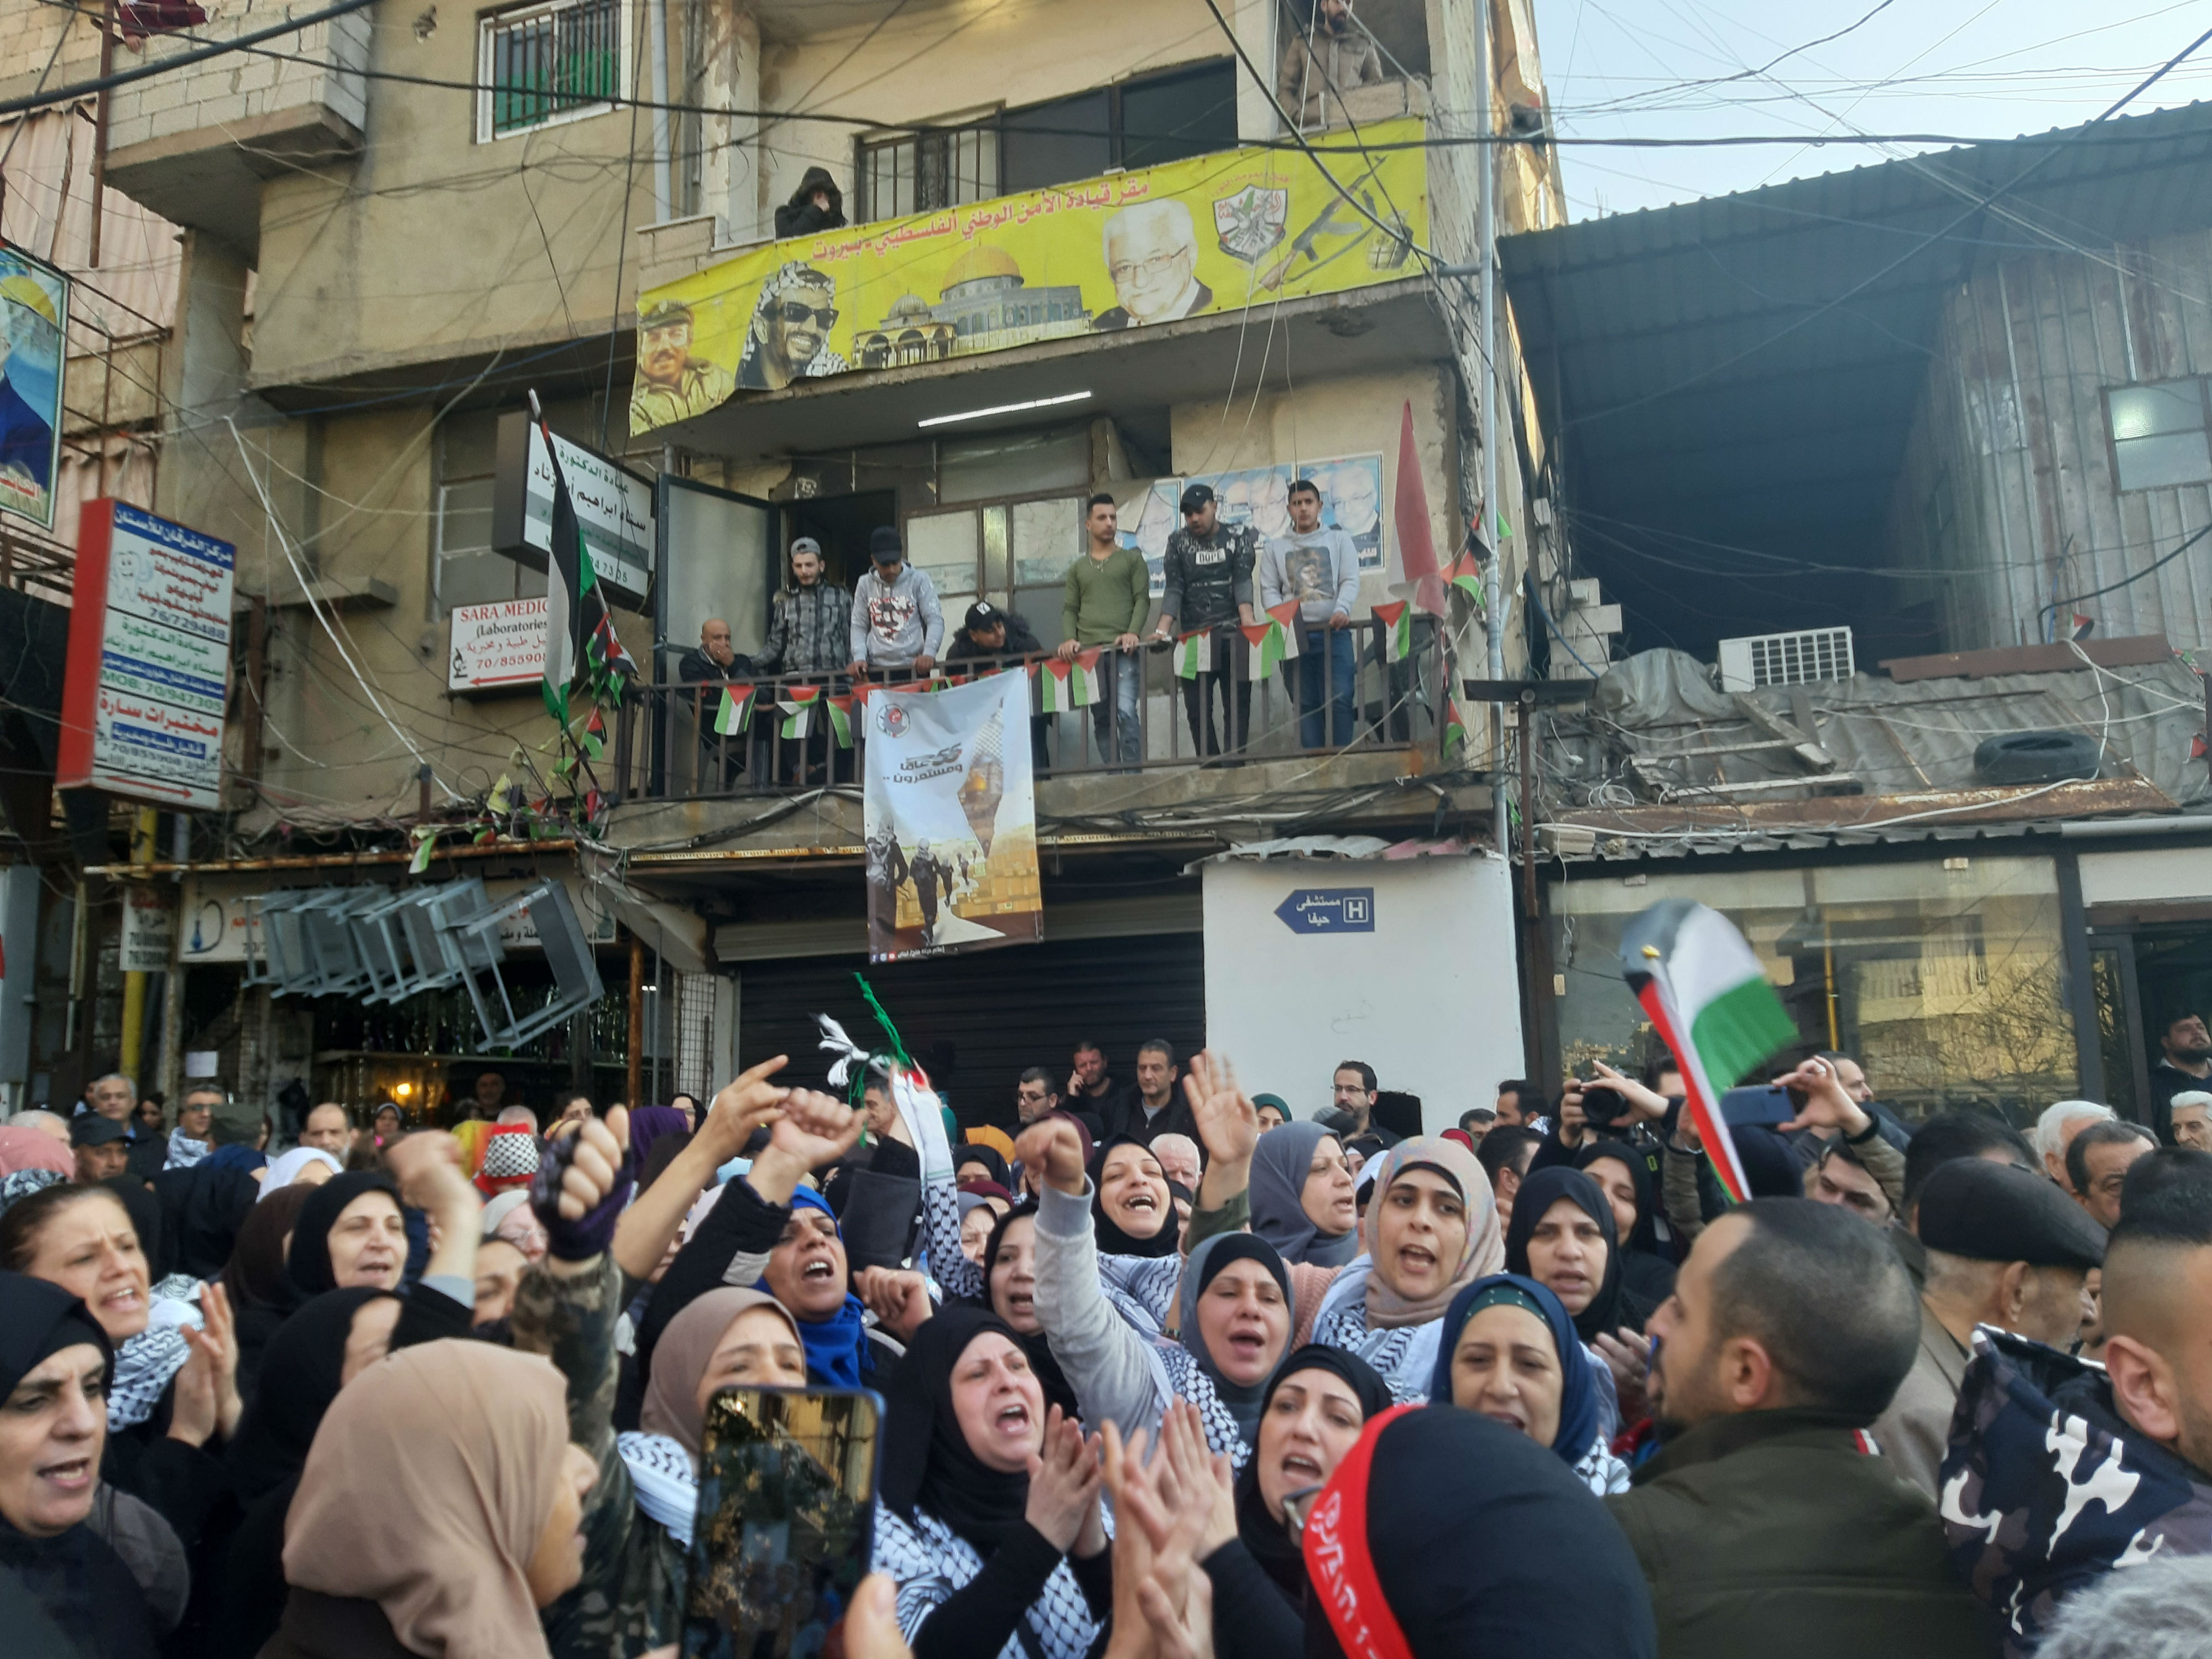 Palestinian refugees protest in Bourj al-Barajneh camp in Lebanon (MEE/Abby Sewell)